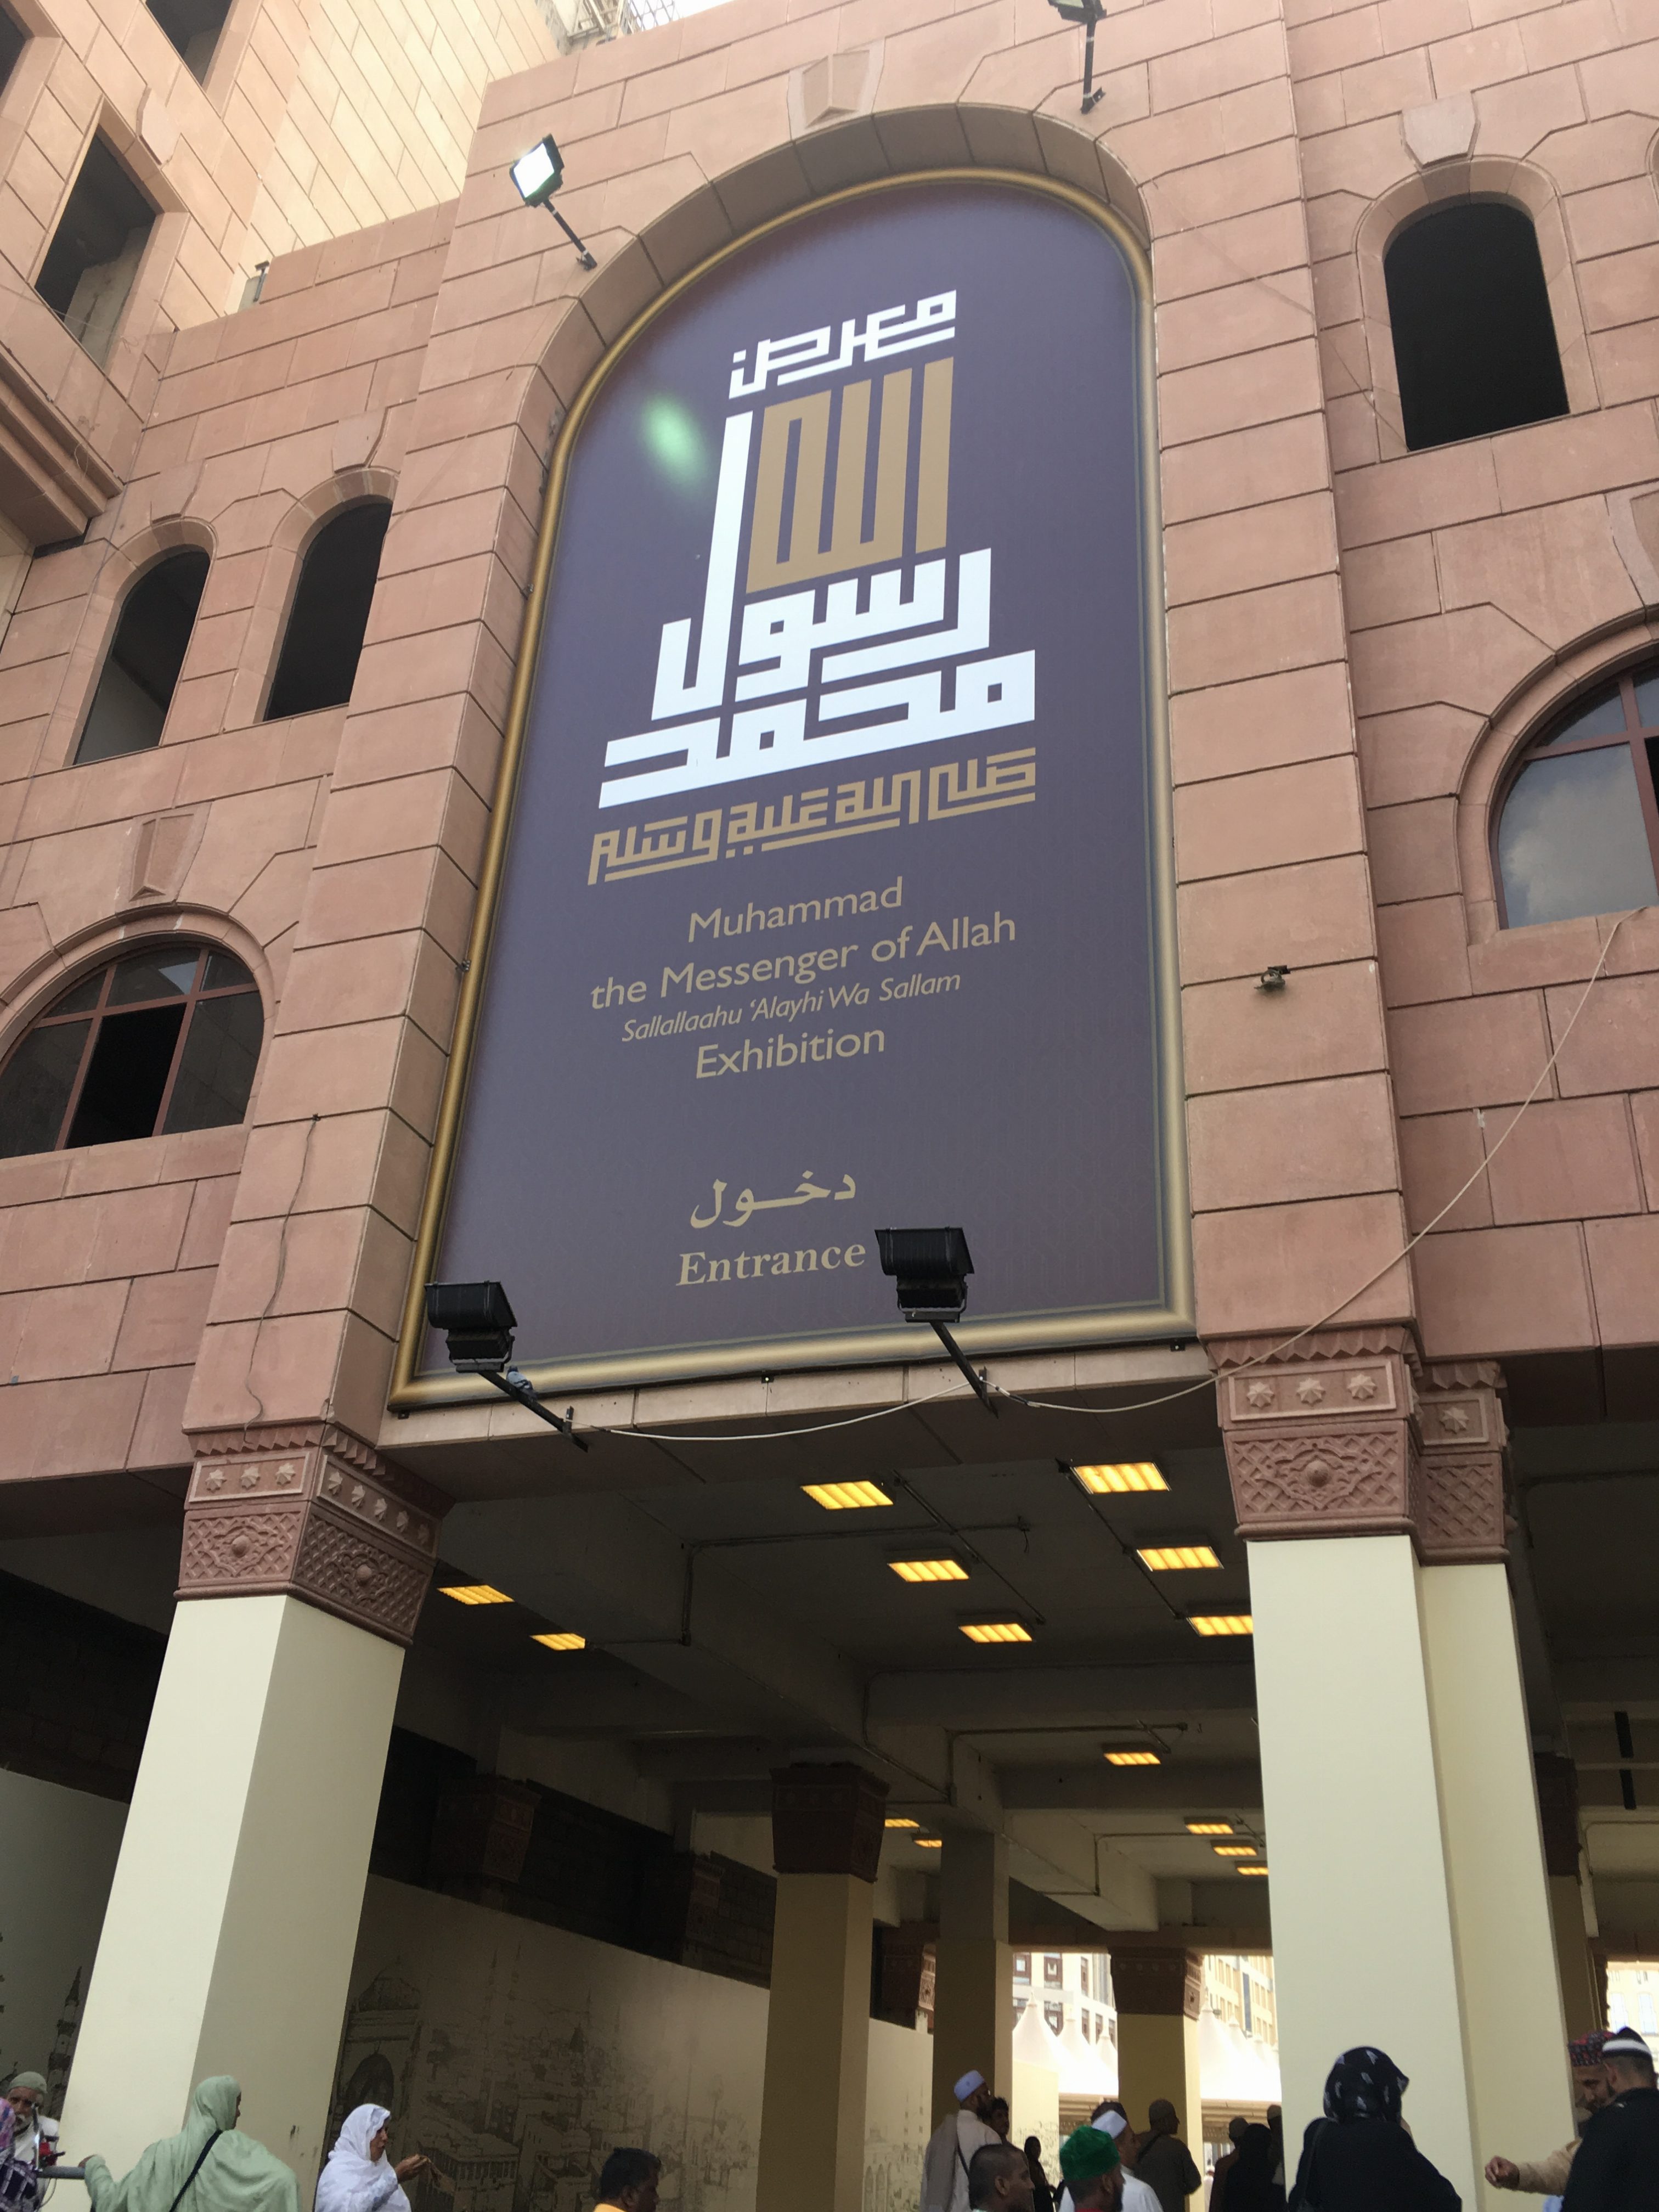 Muhammad (SWS), the Messenger of Allah Exhibition